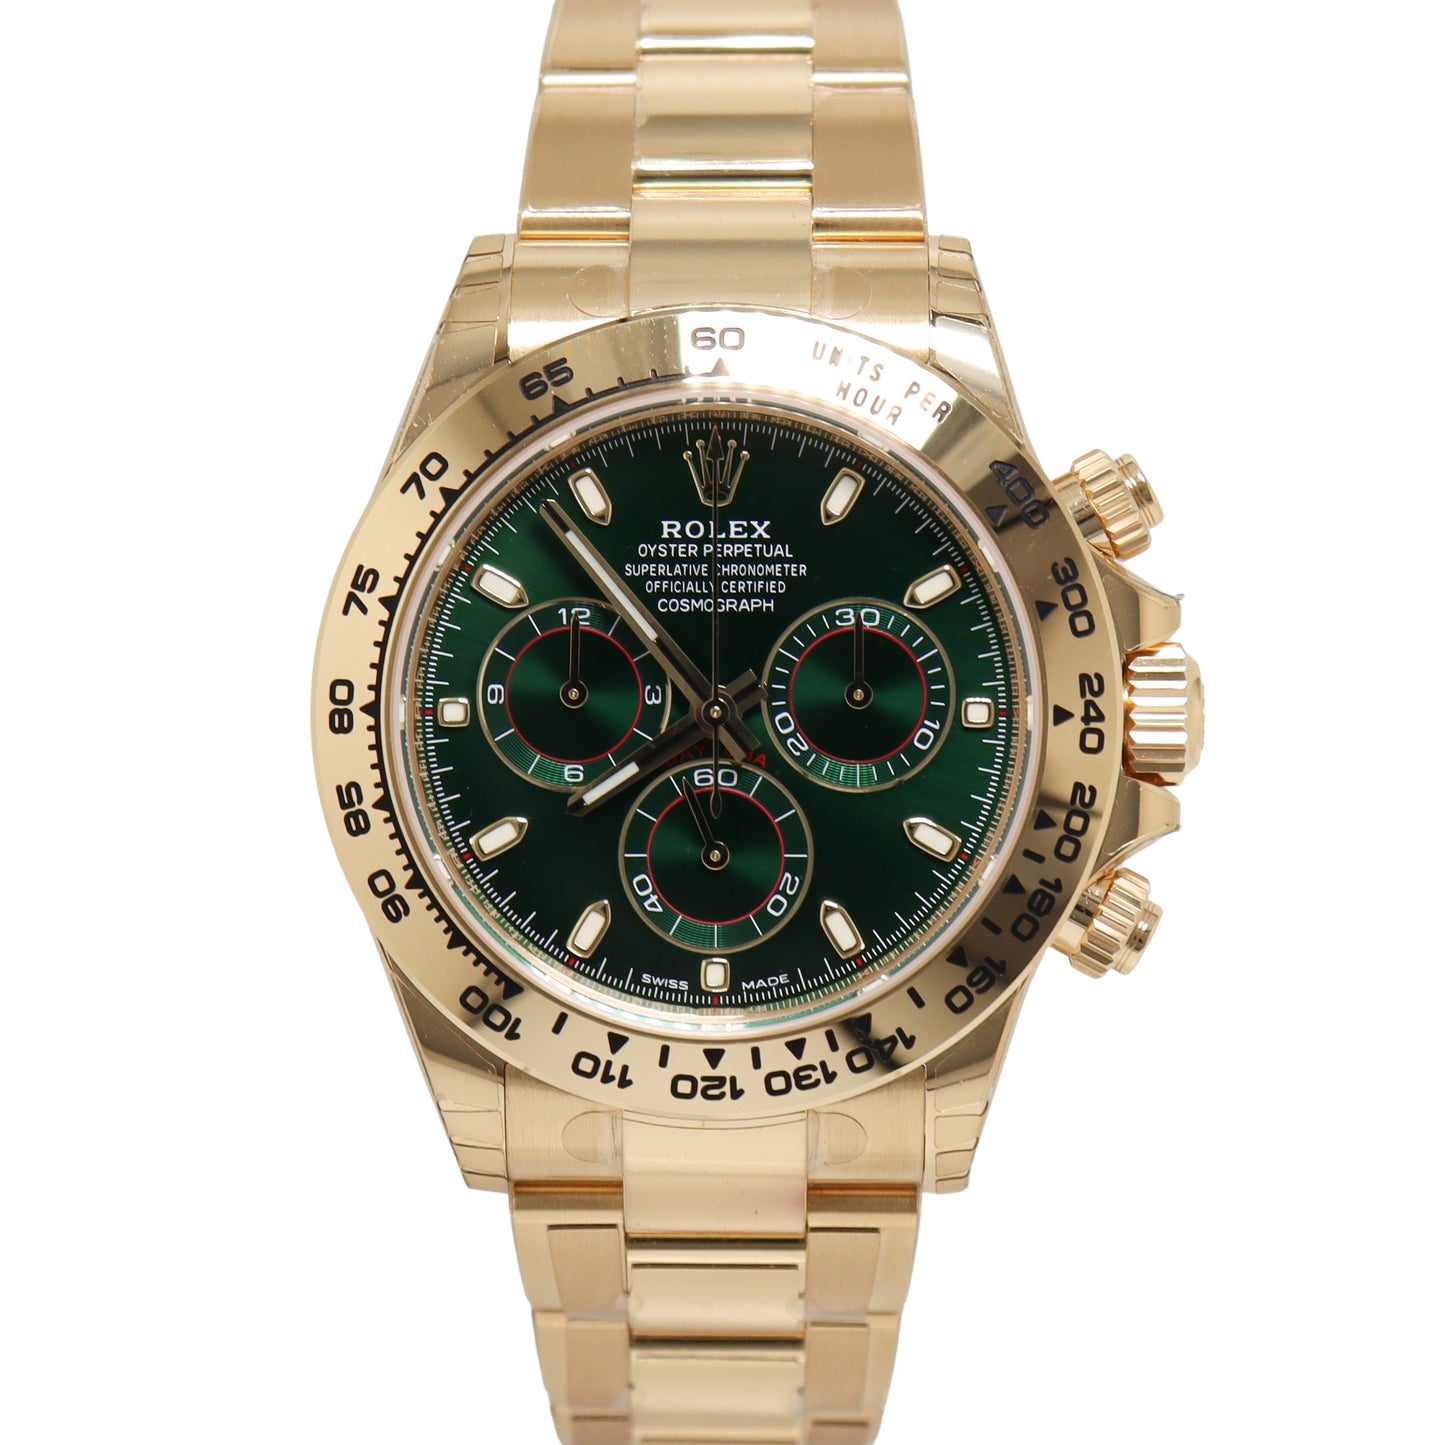 Load image into Gallery viewer, Rolex Daytona Yellow Gold 40mm Green Chronograph Dial Watch Reference#: 116508 - Happy Jewelers Fine Jewelry Lifetime Warranty
